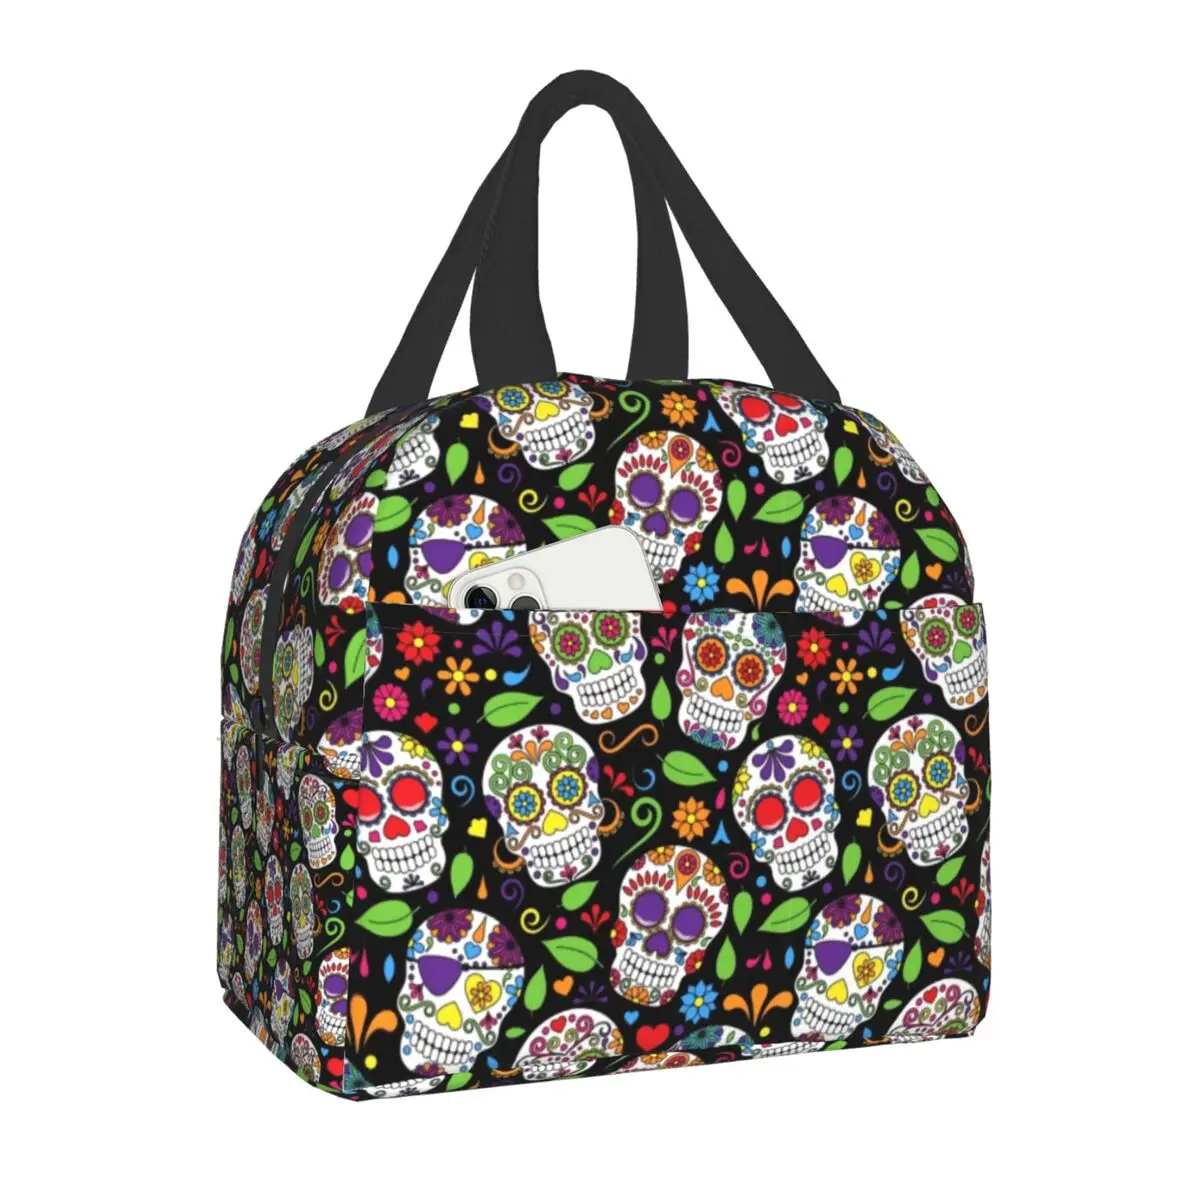 

Day Of The Dead Mexican Sugar Skull Insulated Lunch Bag Waterproof Halloween Cooler Thermal Lunch Box for Women Work School Food